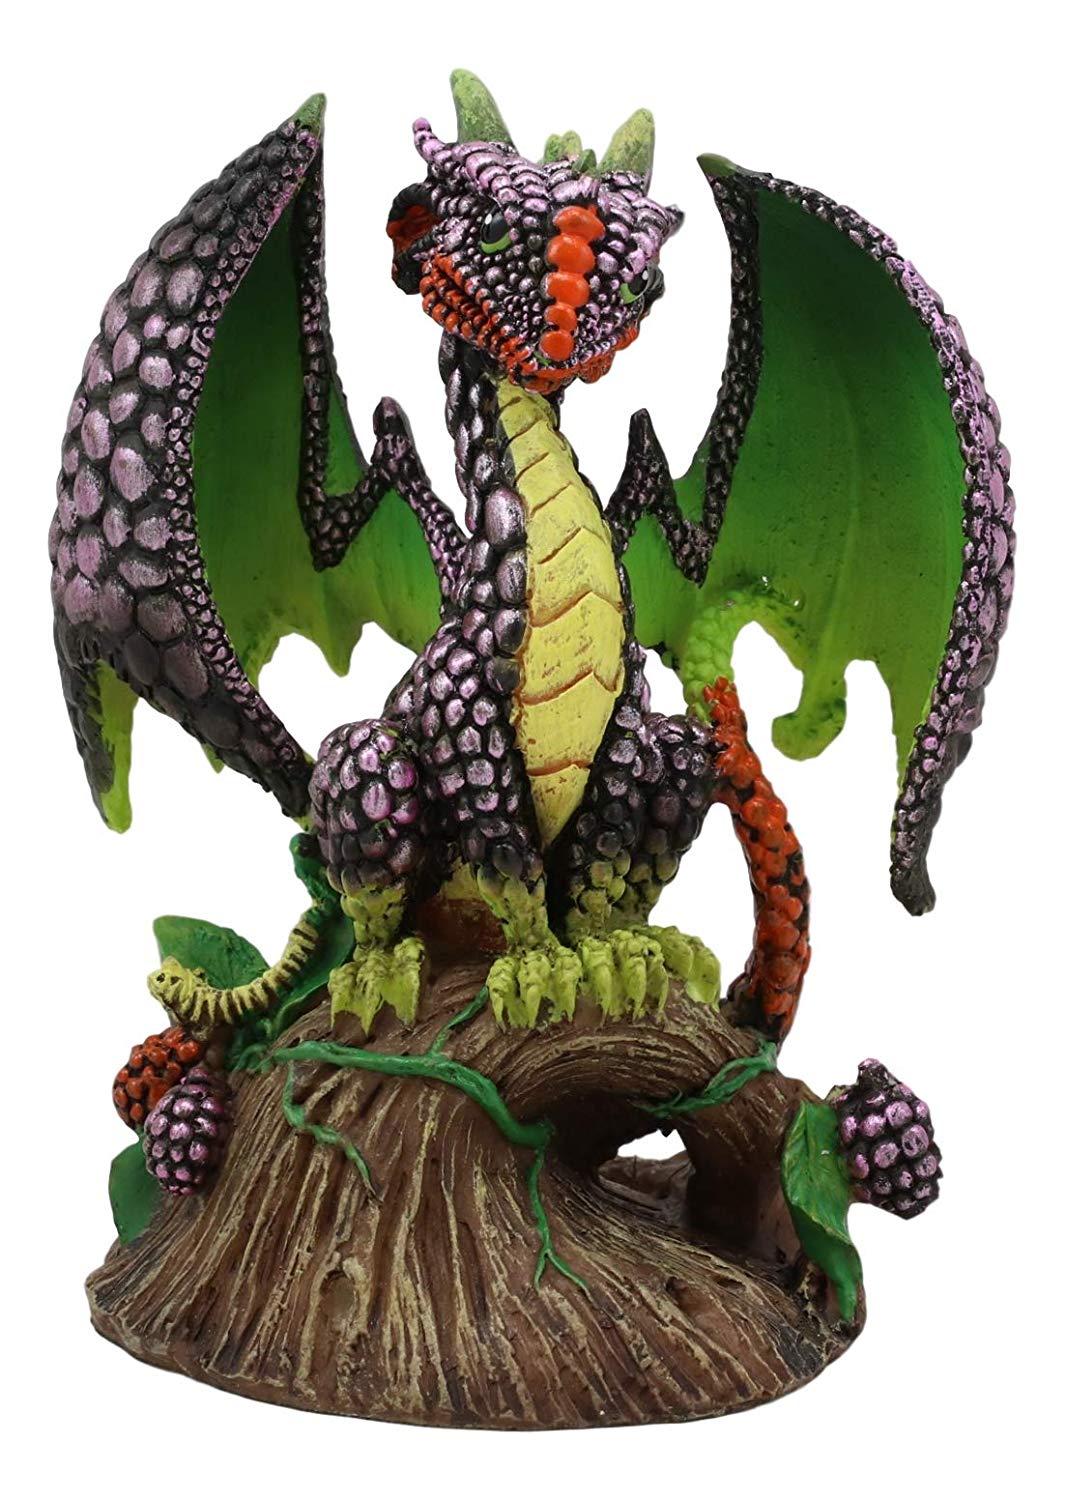 Ebros Colorful Fairy Garden Fruits And Berries Green Blackberry Dragon Statue - image 1 of 4